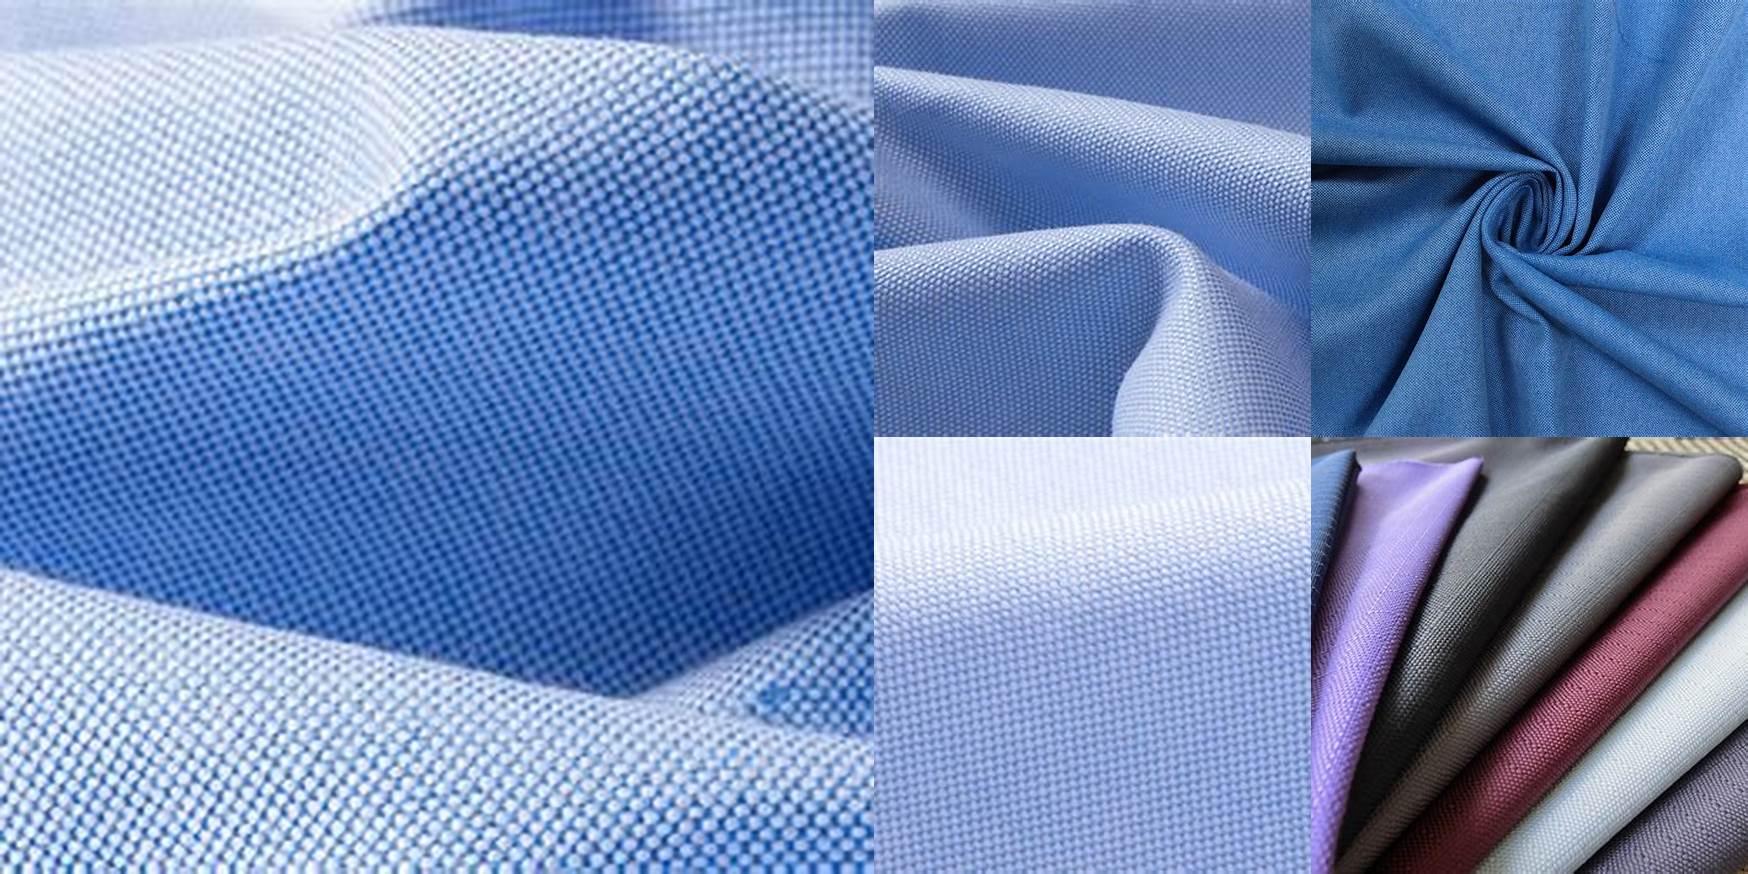 What Is Oxford Cloth Made Of